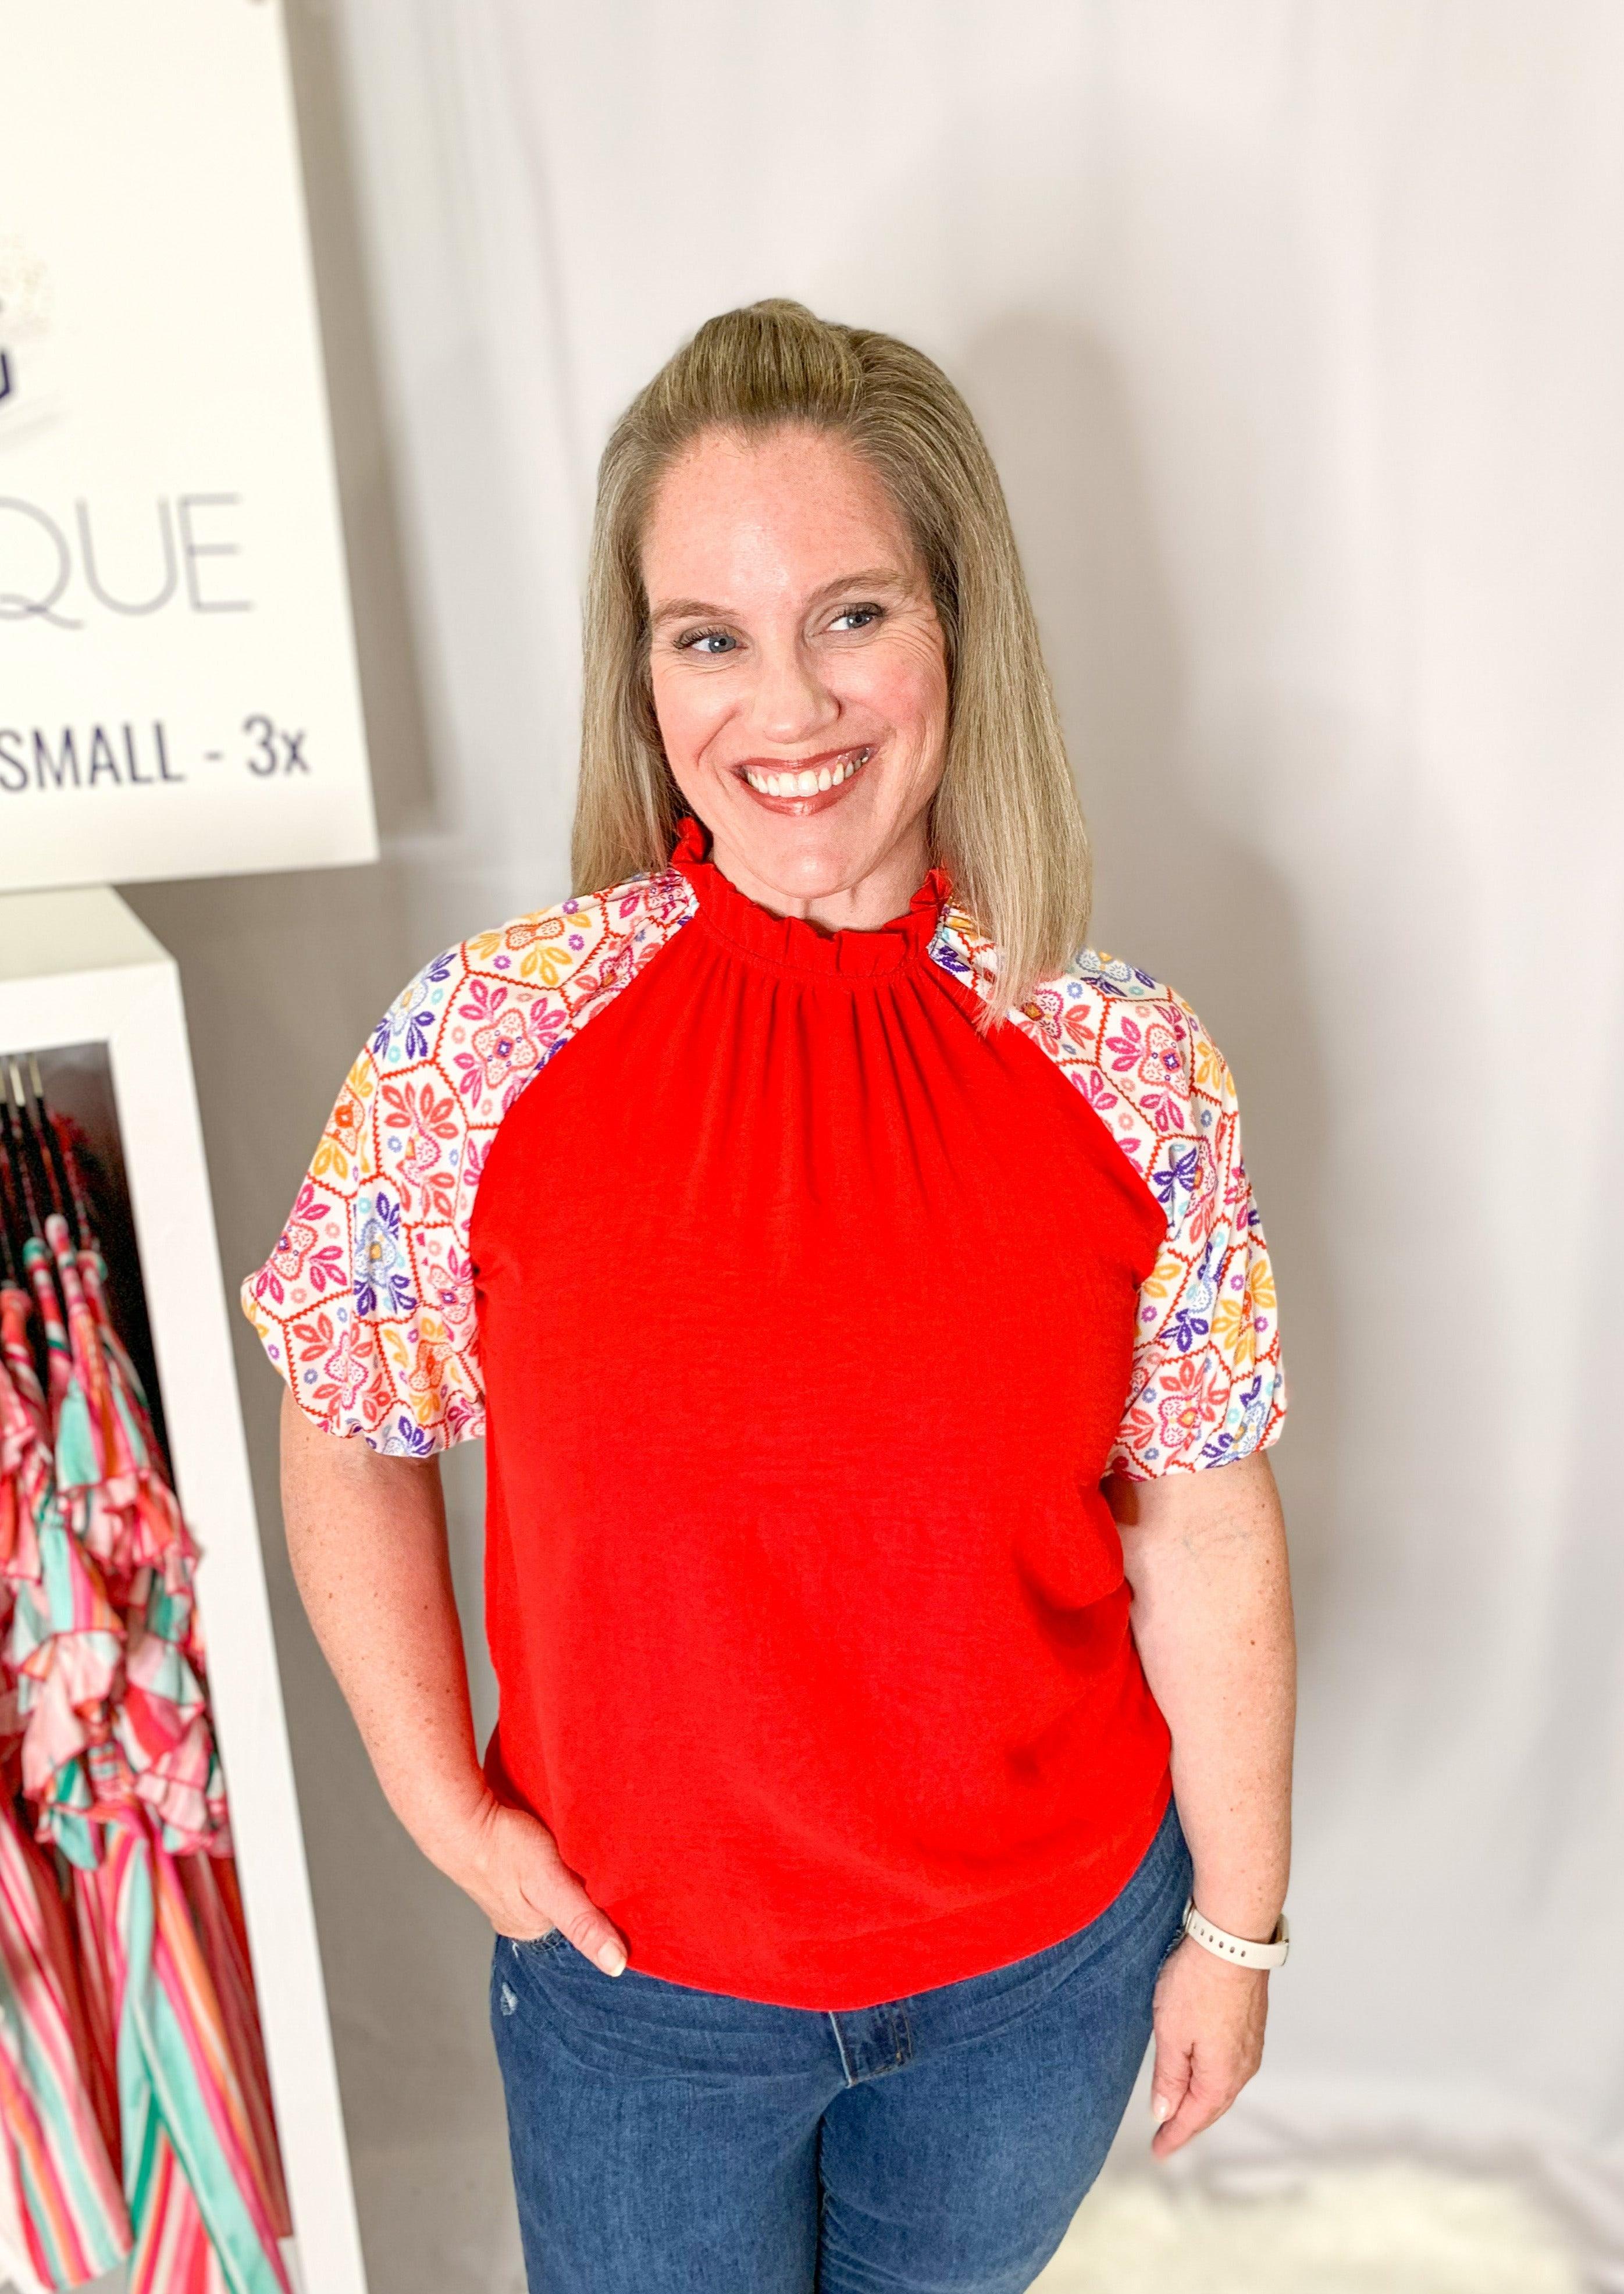 Red top with a ruffle collar. White balloon sleeve with a multicolored printed embroidery pattern.